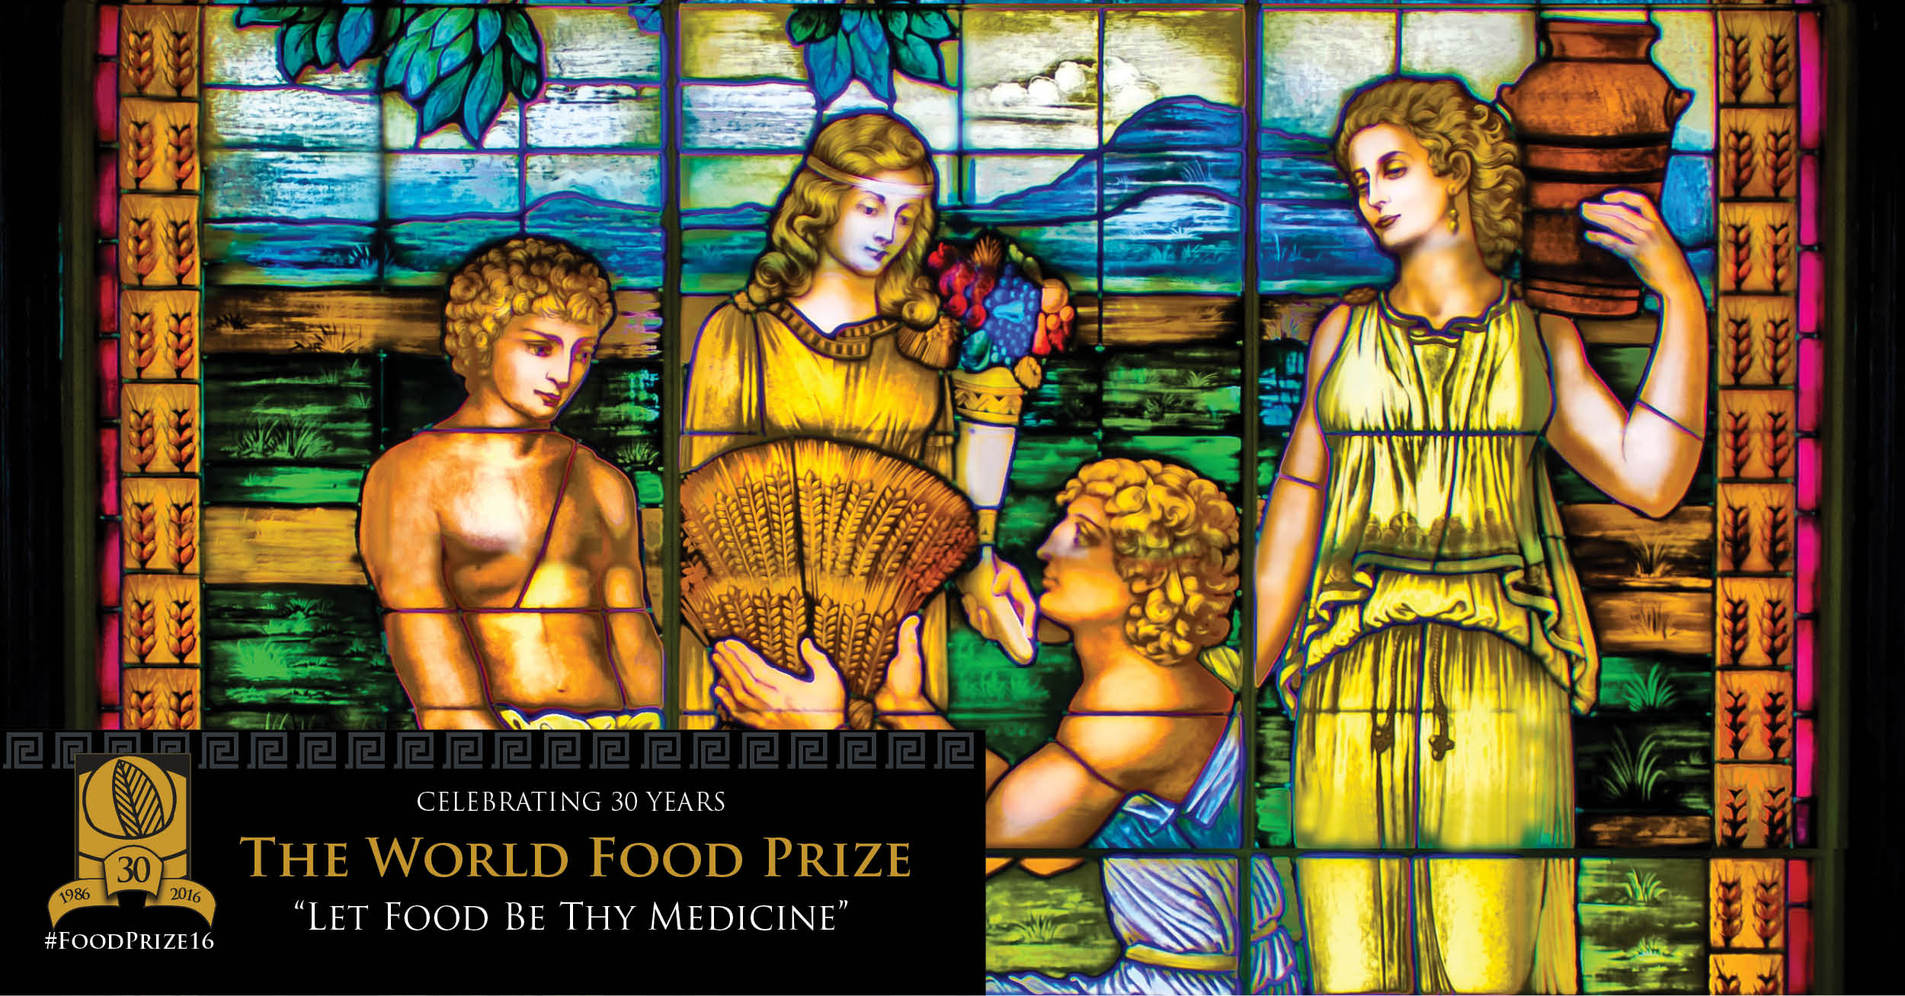 Stainglass depicting food being handed over (Image from the Borlaug Symposium)